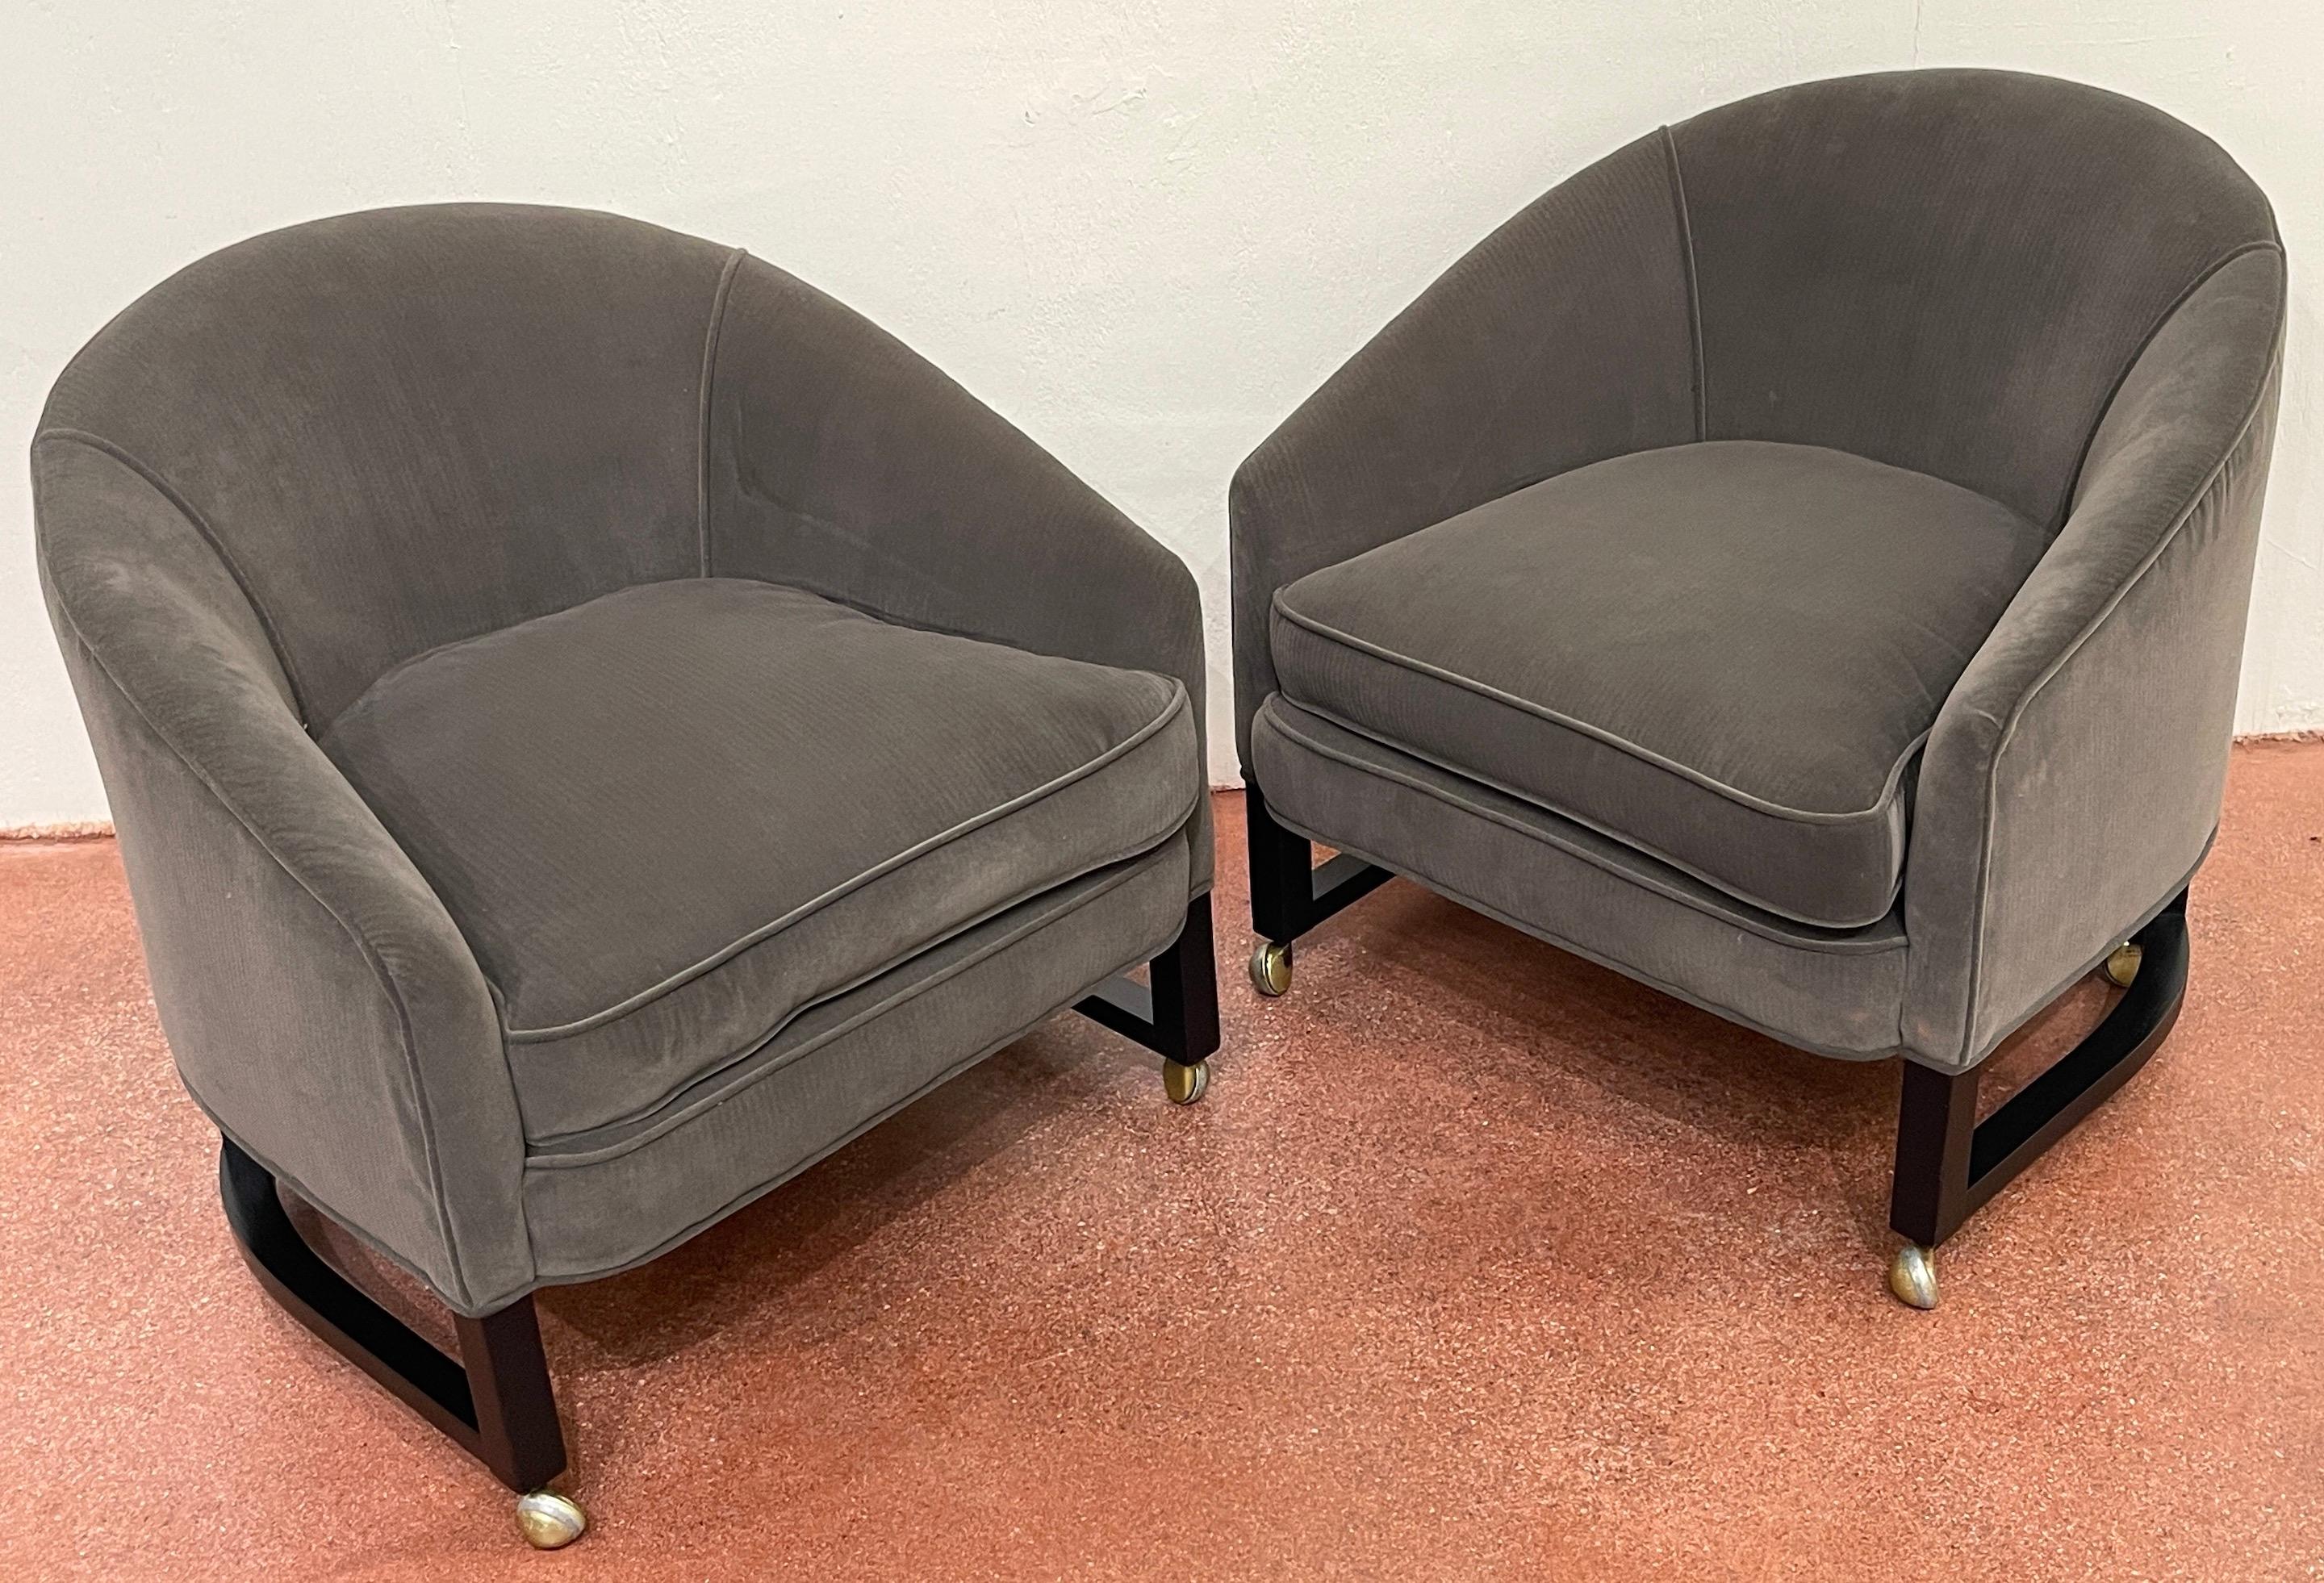 Pair of 1970s Low Profile Barrel Back Club Chairs, Style of Harvey Probber
Each one of sleek proportions, raised on trellis blackened wood frame fitted with castors. Upholstered in neutral gray upholstery.
Overall measurements 27-Inches high x